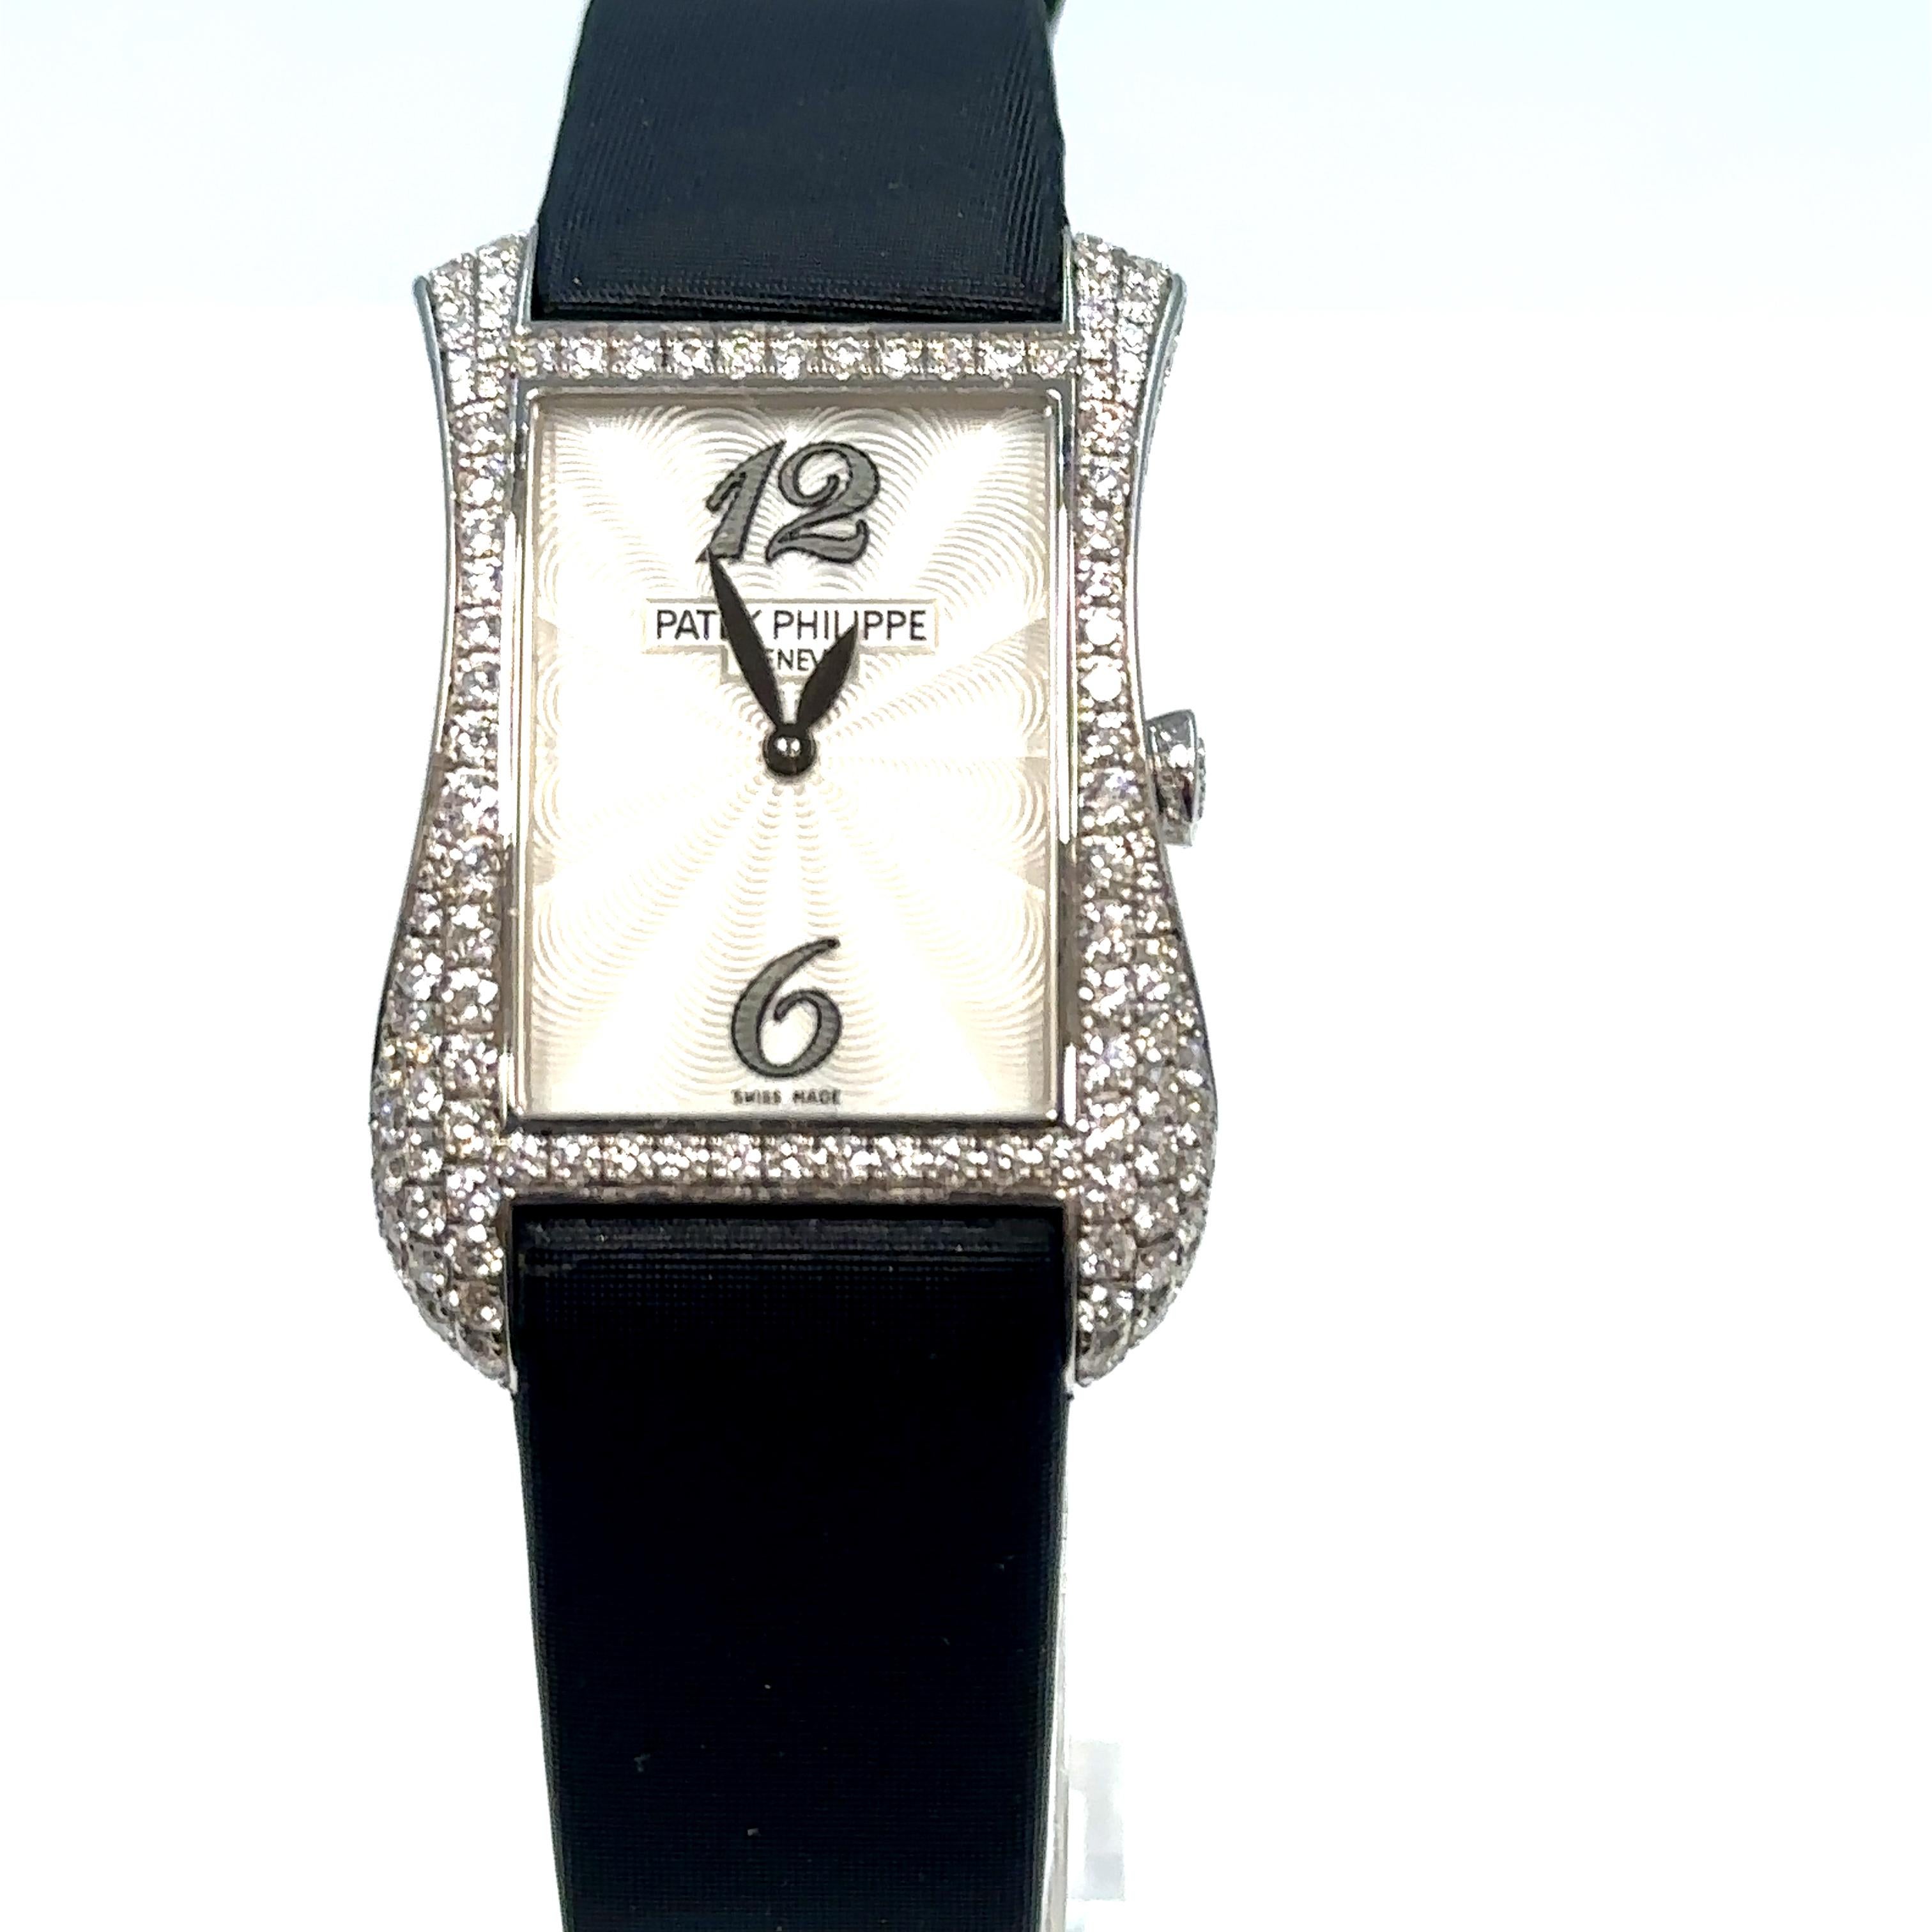 This is an absolutely stunning Patek Philippe Genovo Serata ladies watch Ref 4972G in excellent condition.

Solid 18kt white gold case, pave set with 243 diamonds weighing approximately 2.54 carats.

Black satin strap with white gold pin buckle set